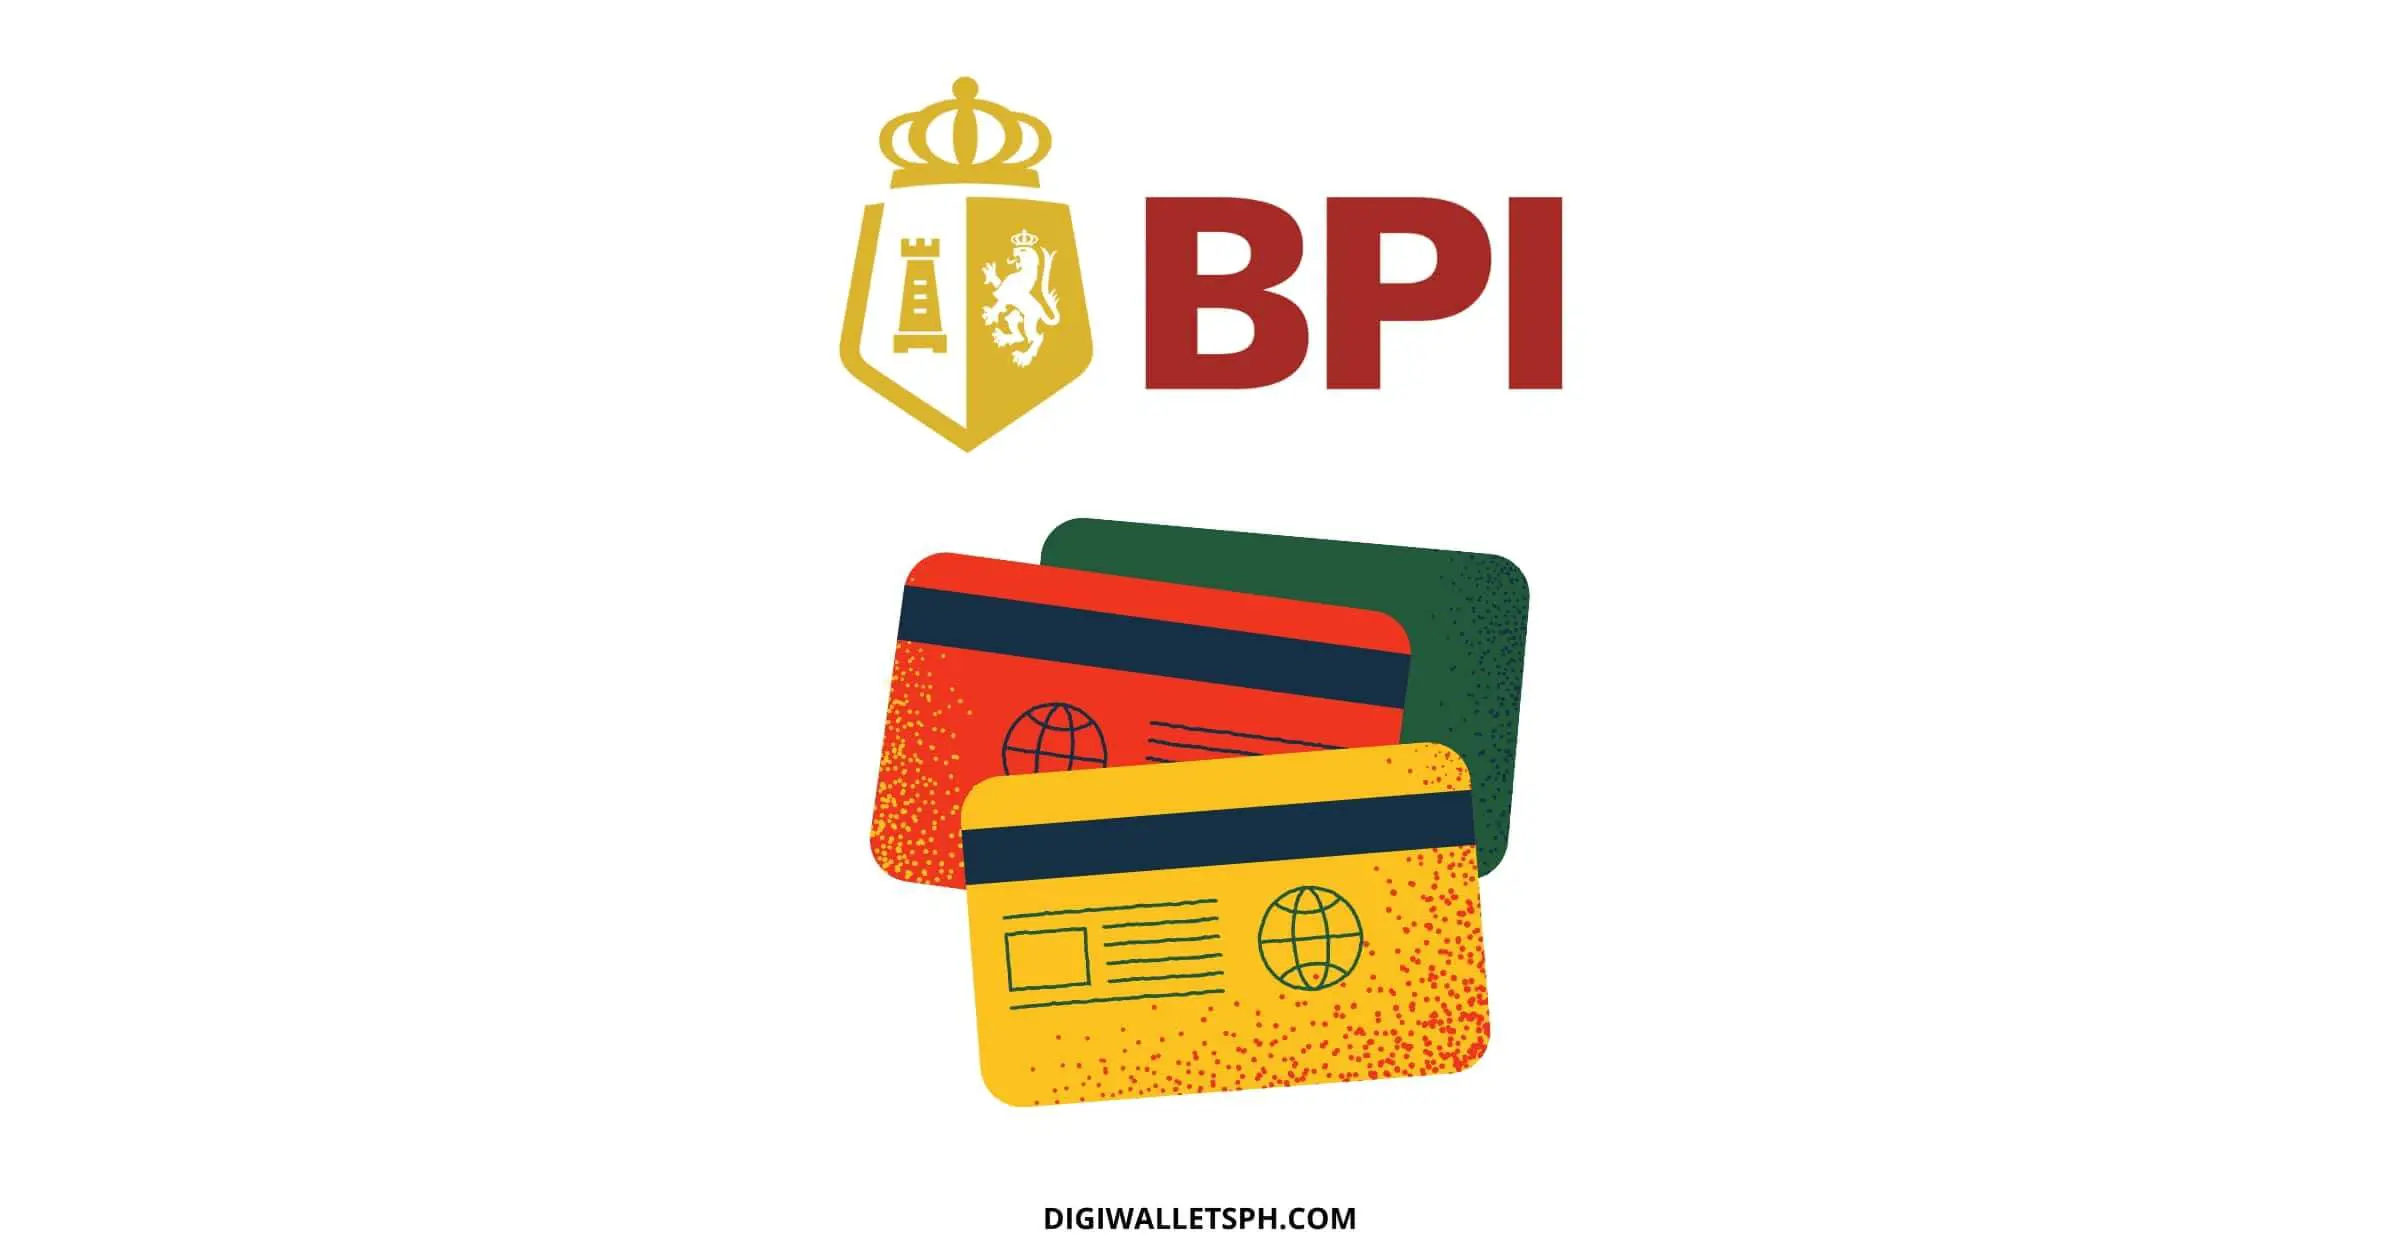 How to use BPI credit card points